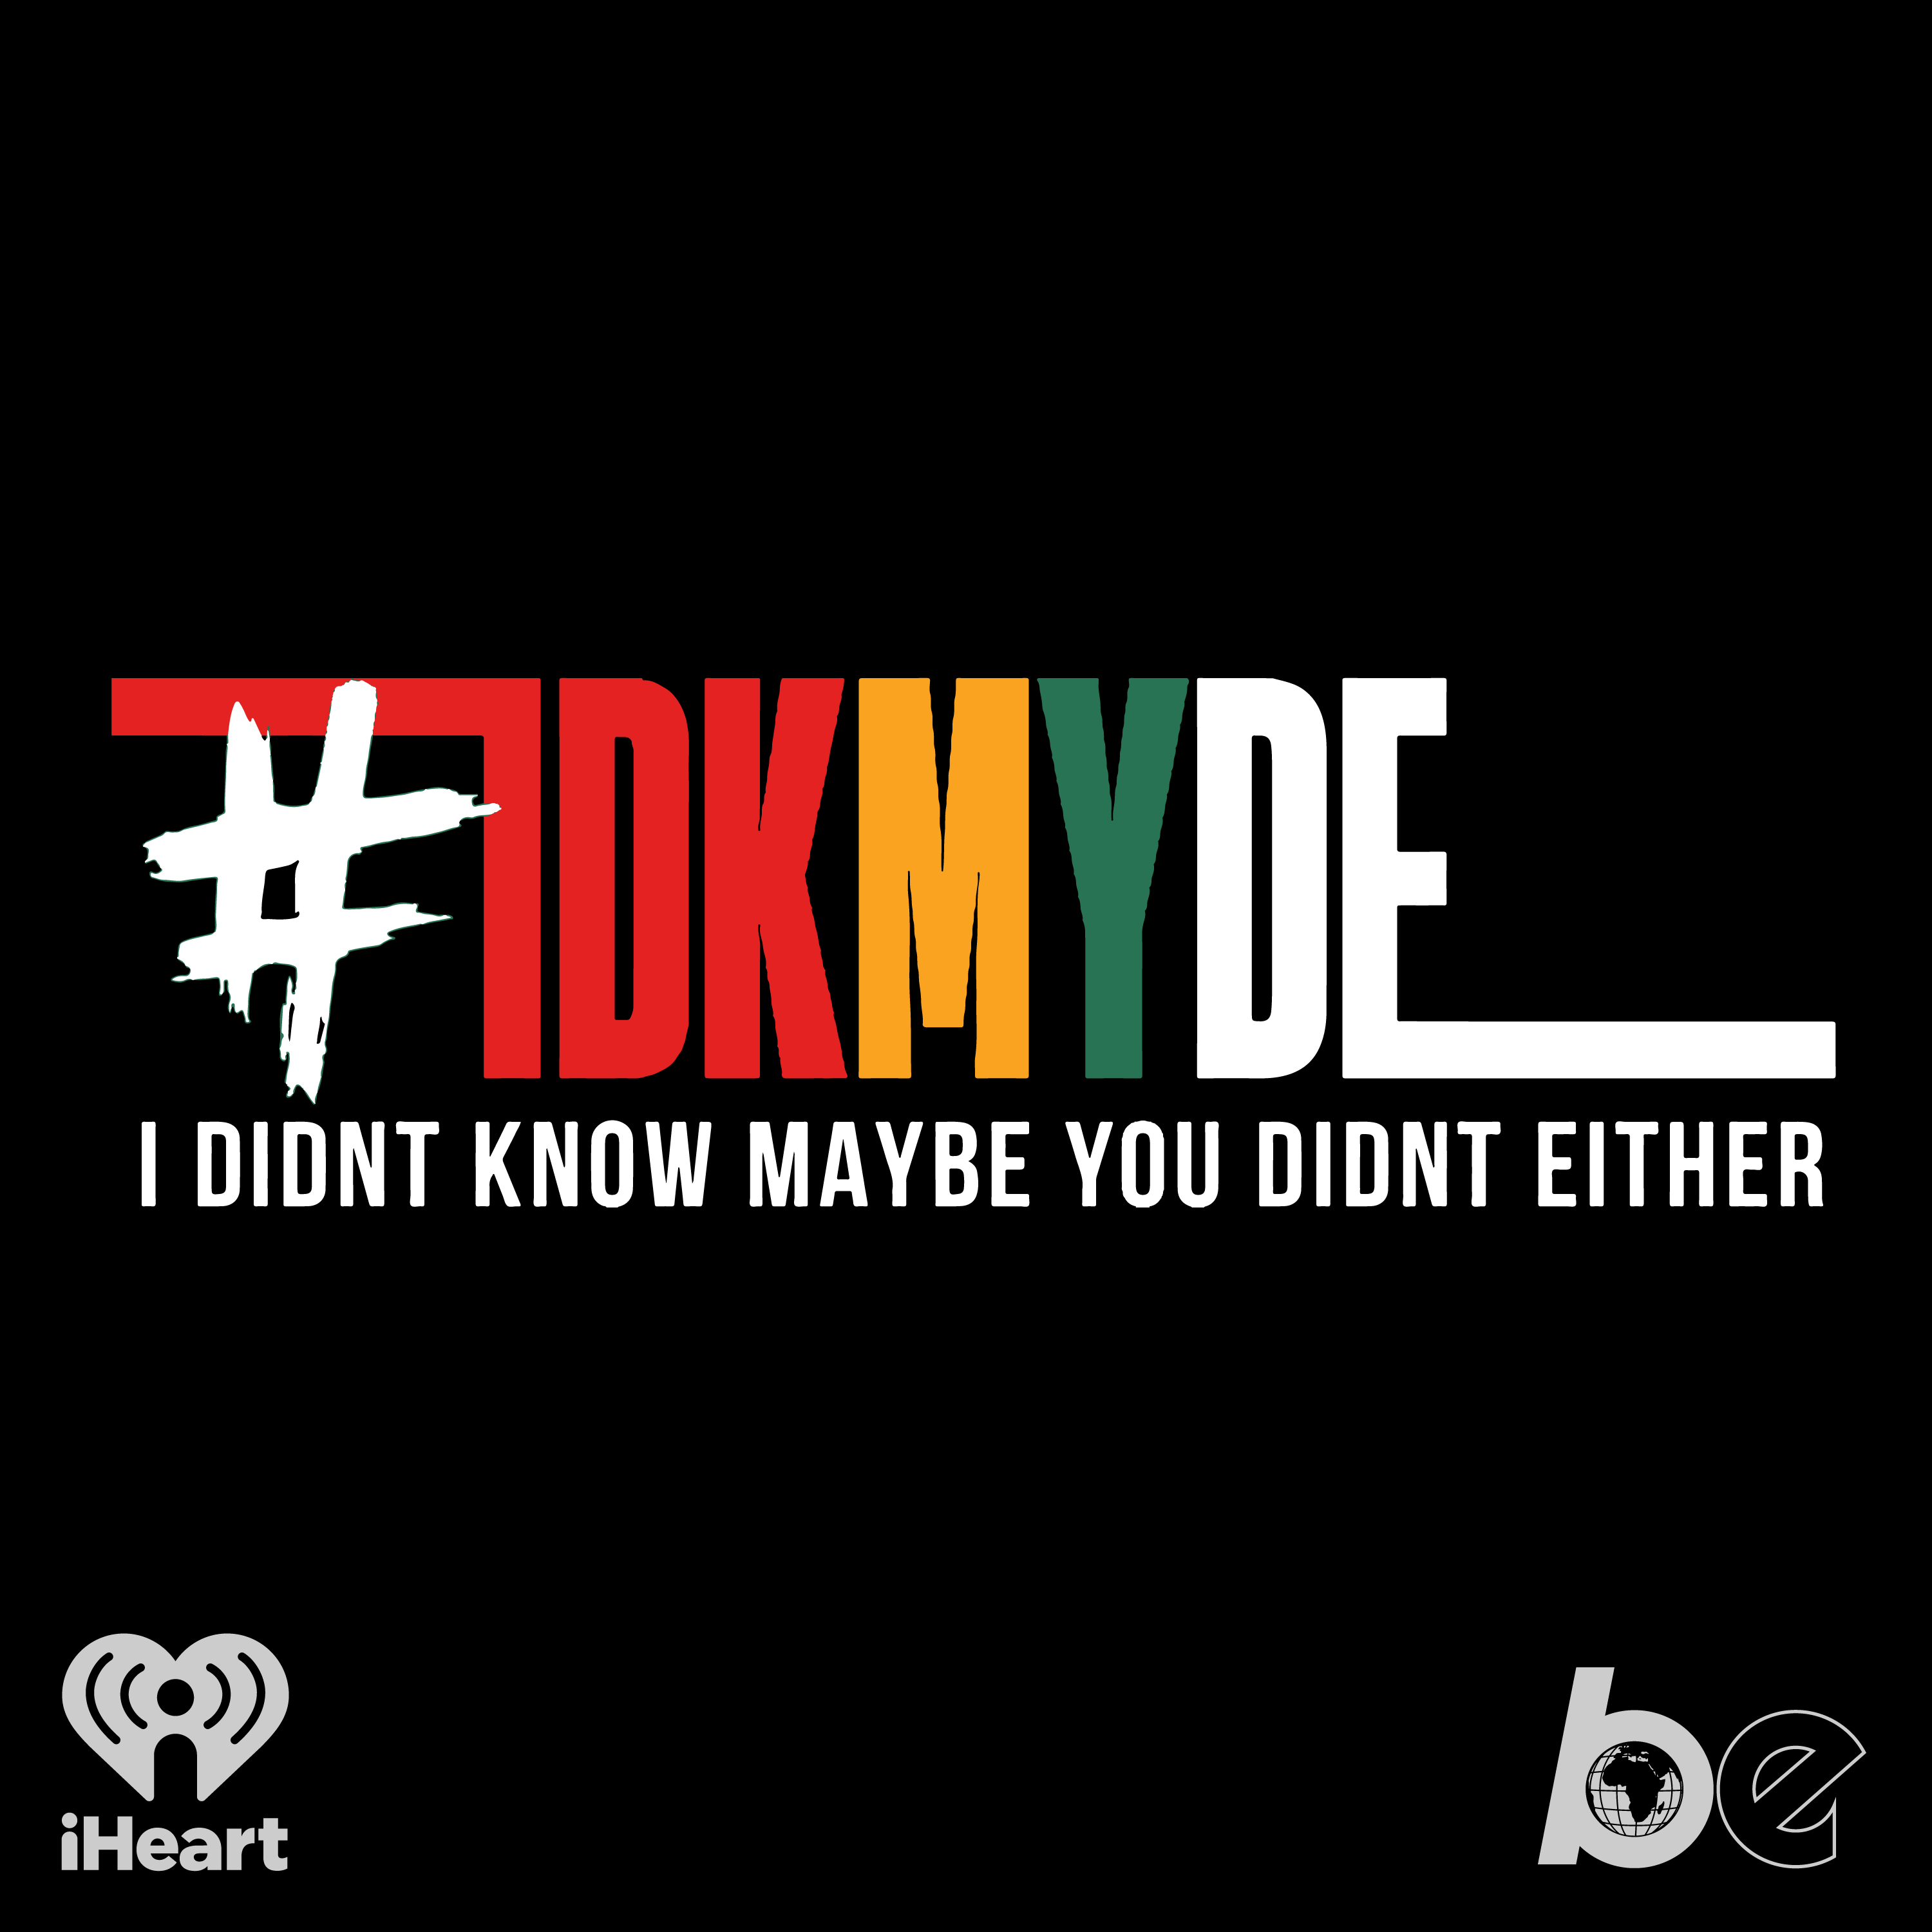 IDKMYDE: The GodFather of Cool